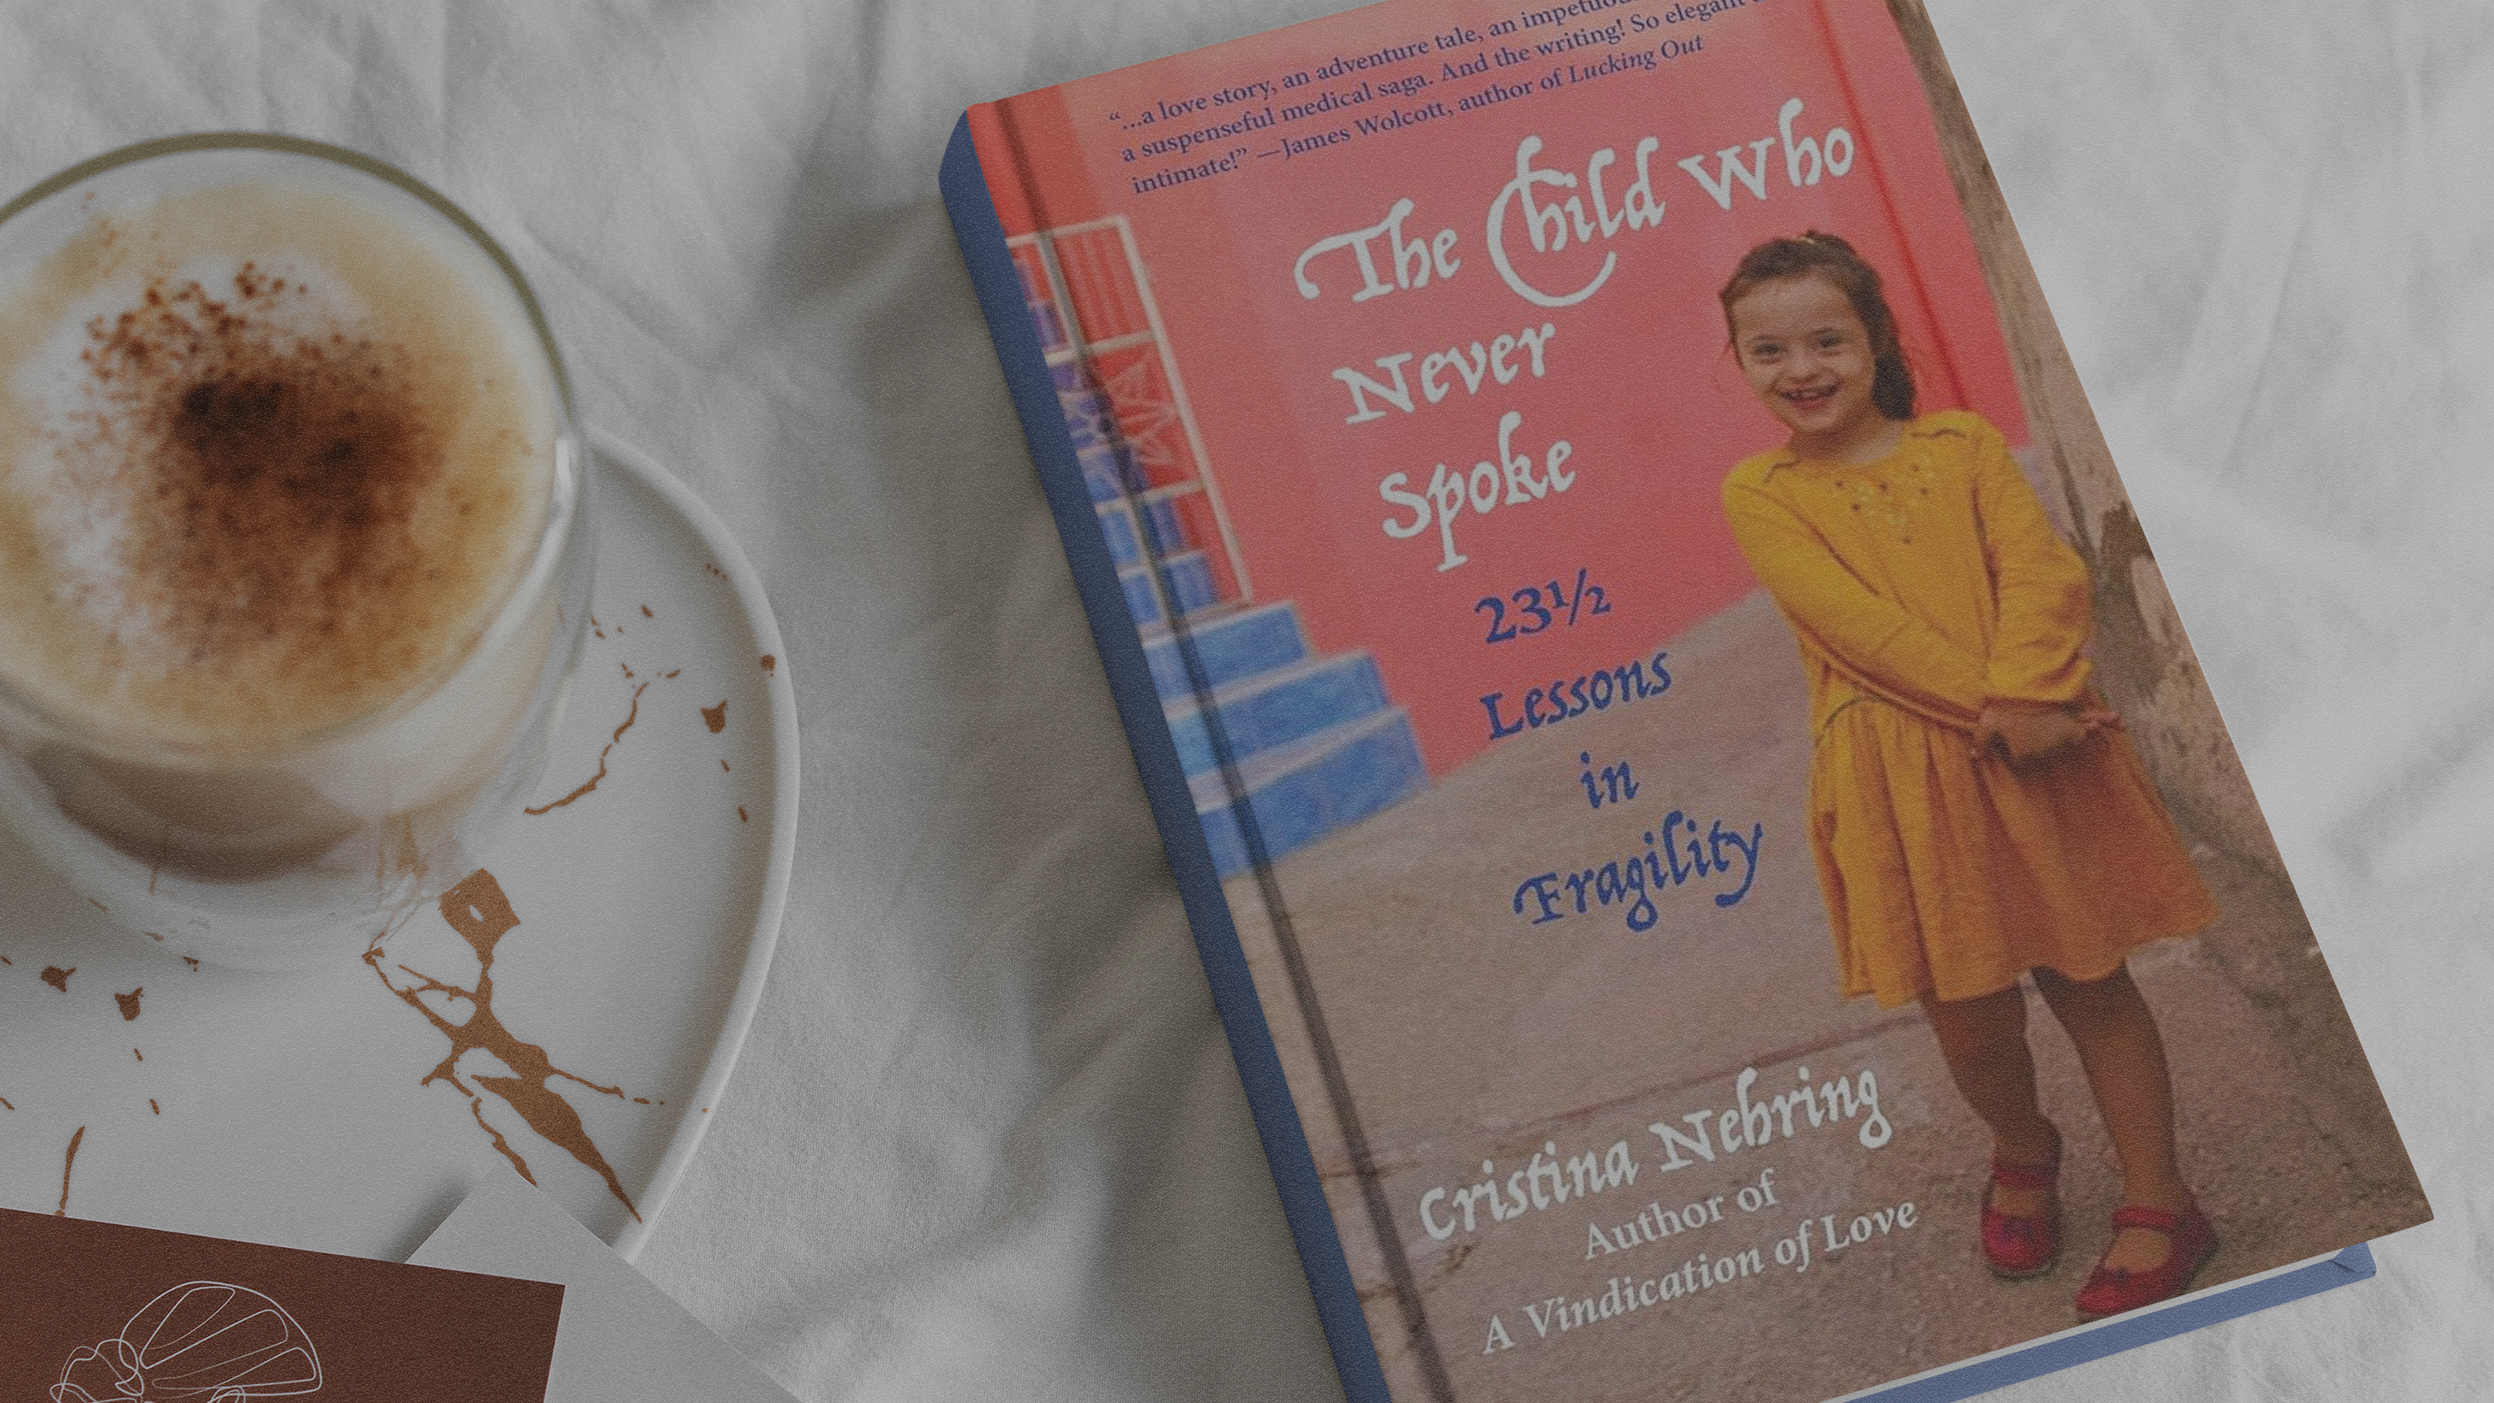 book The Child Who Never Spoke lying on a table with coffee